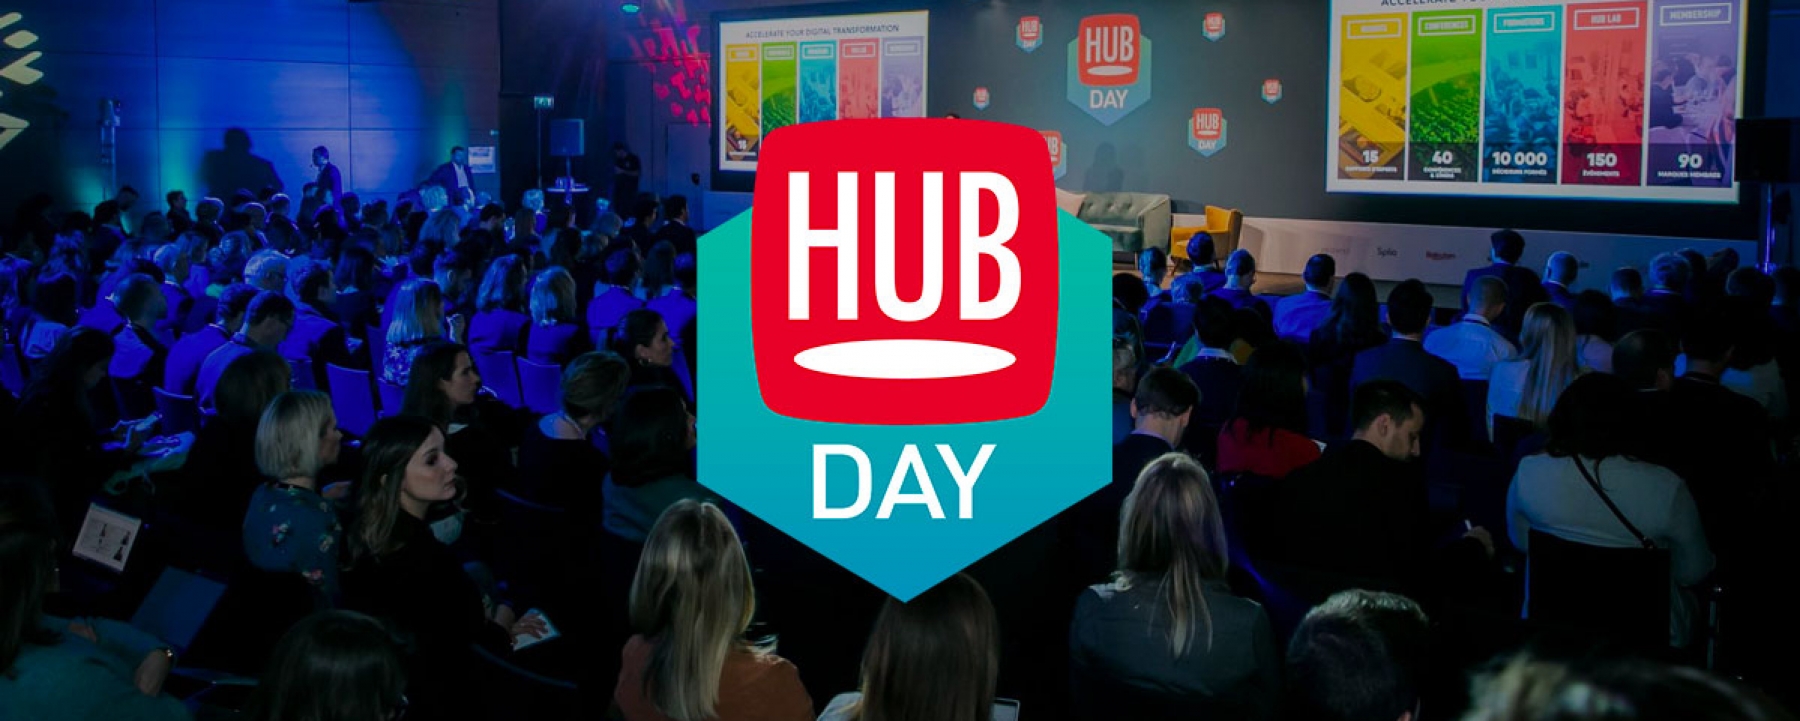 Hubday Data & AI for business 2021